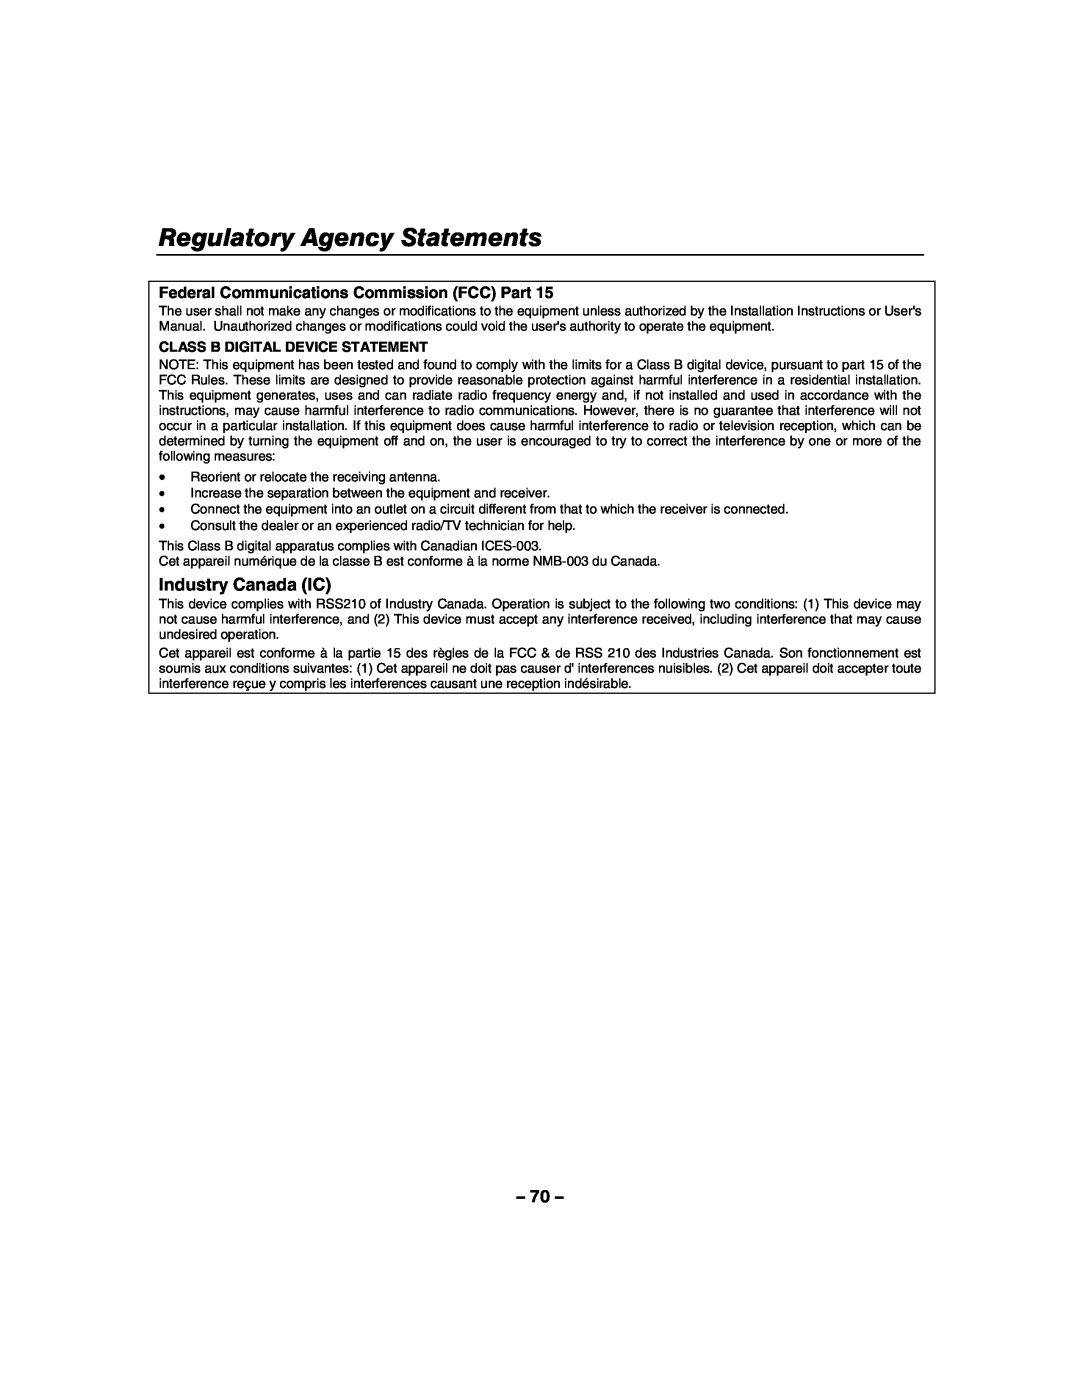 Honeywell 800-06894 manual Regulatory Agency Statements, Industry Canada IC, Federal Communications Commission FCC Part 